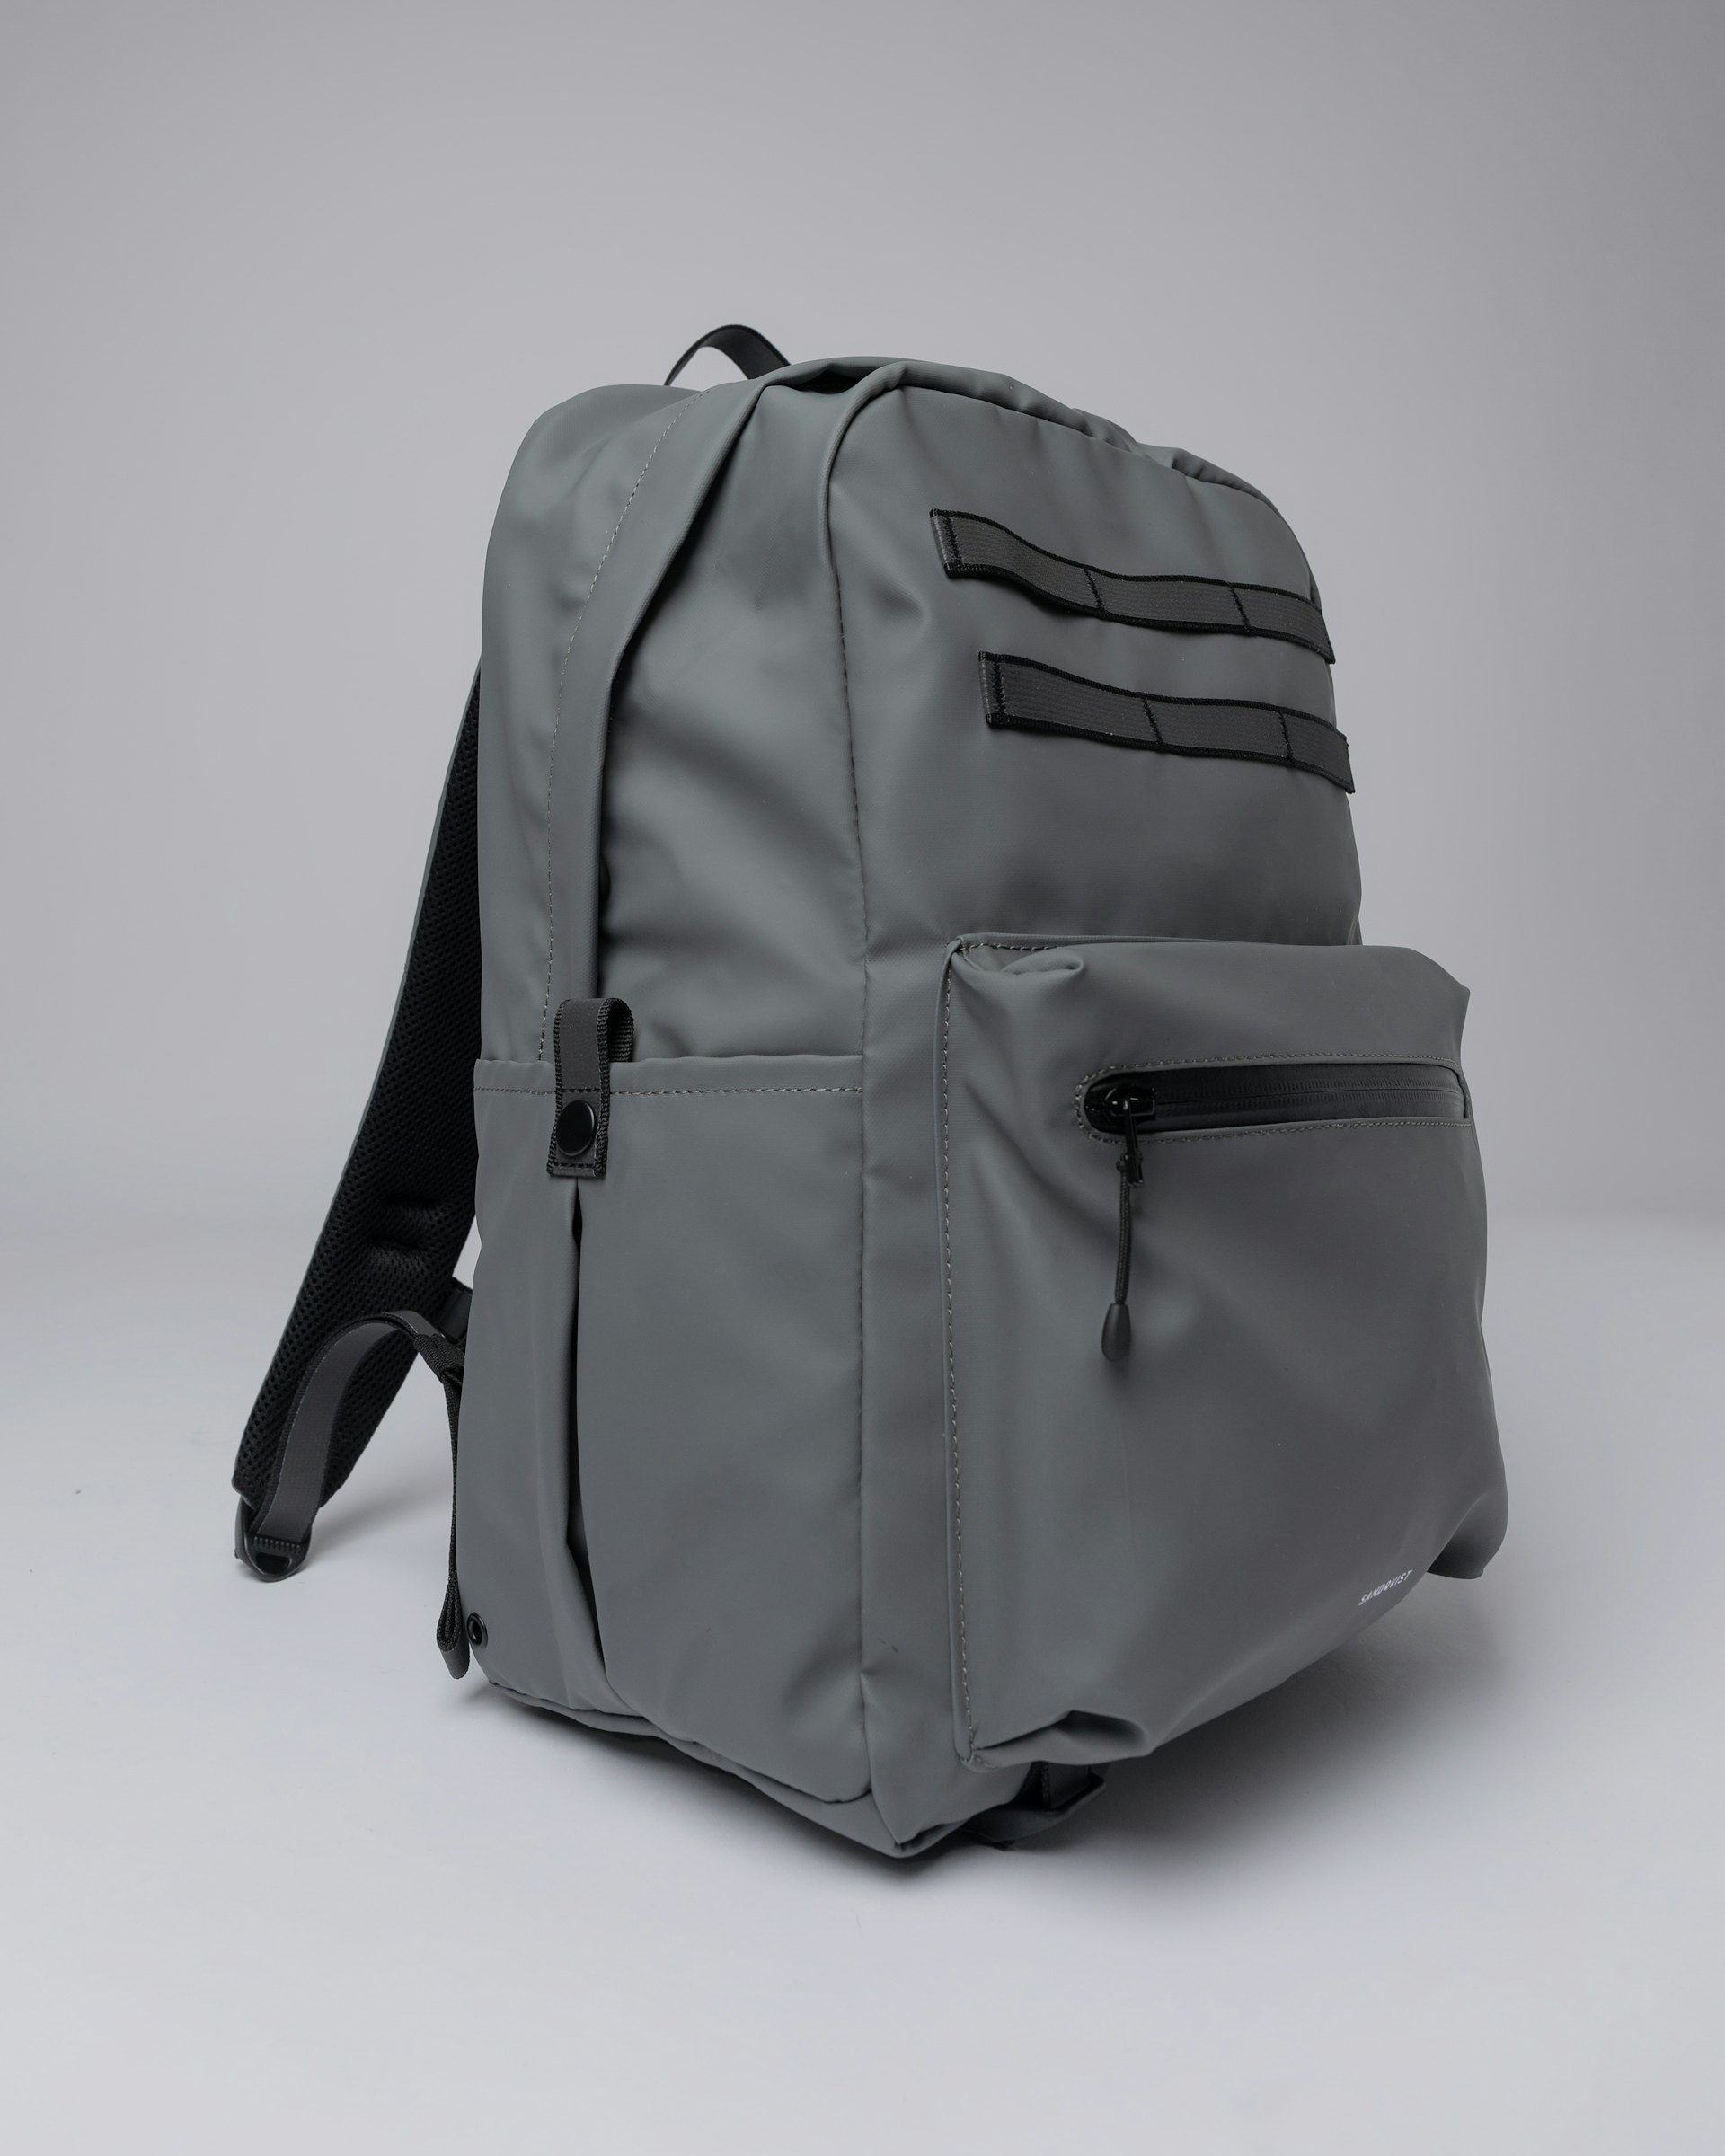 Alvar belongs to the category Backpacks and is in color ash grey (3 of 6)